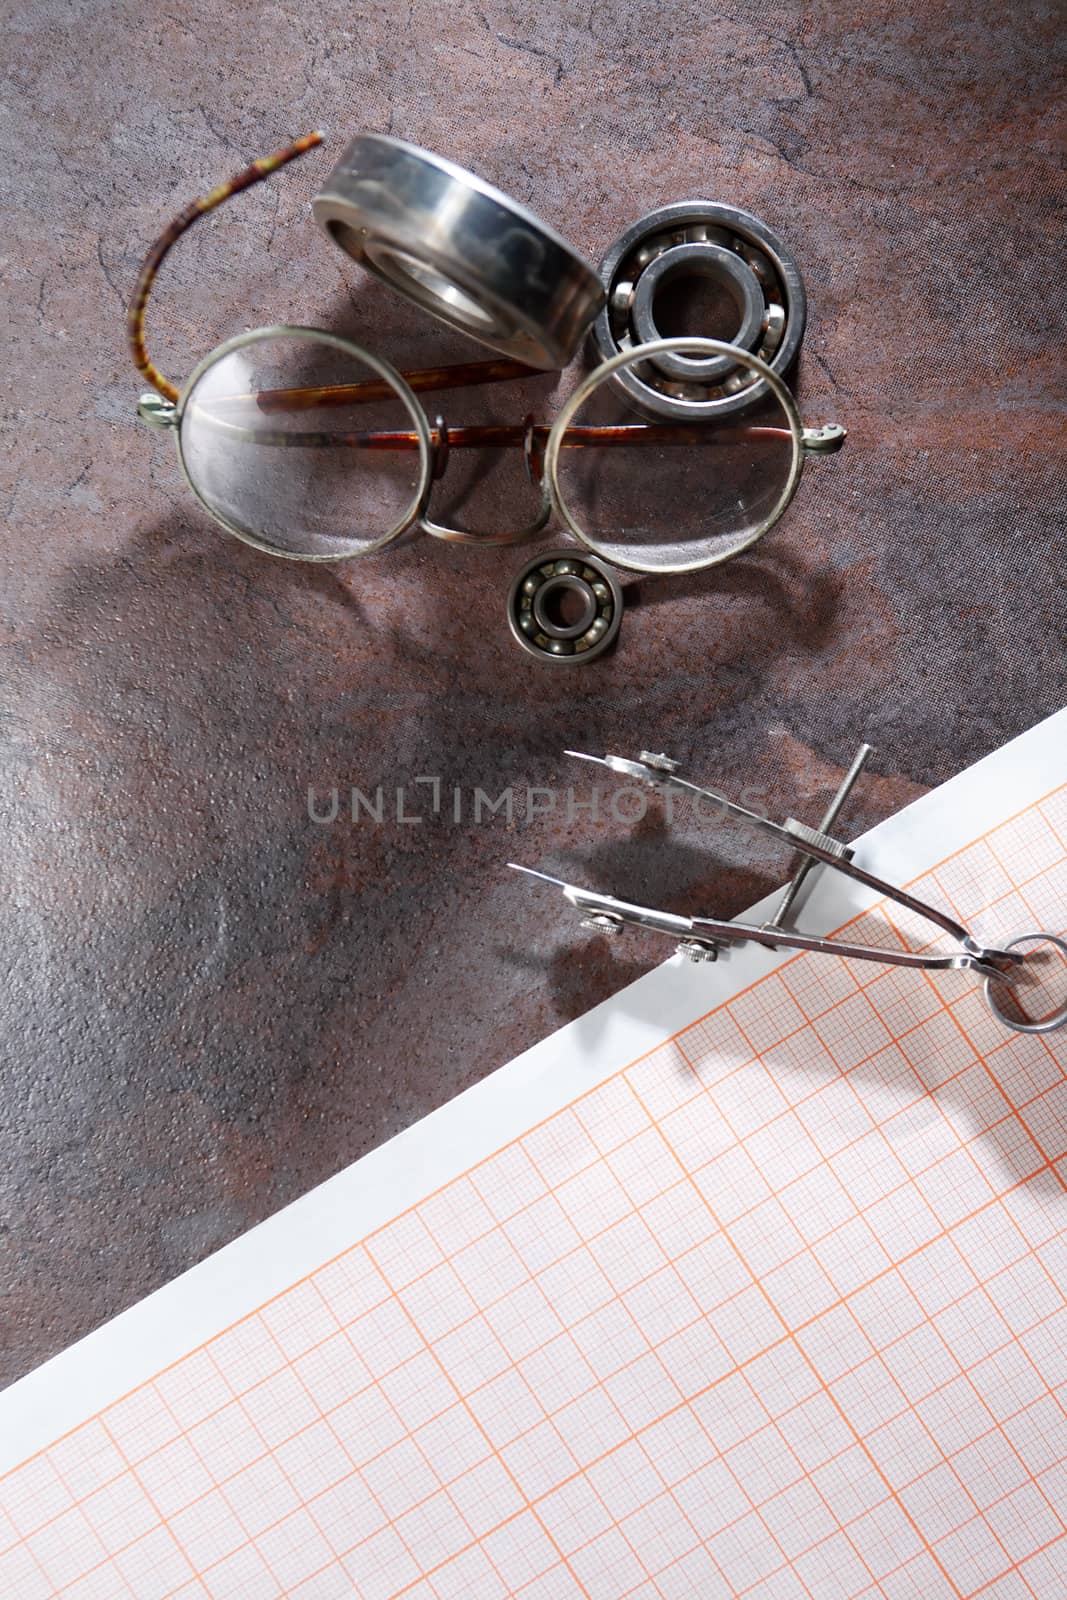 Engineering concept. Set of  ball bearings on grapah paper near spectacles